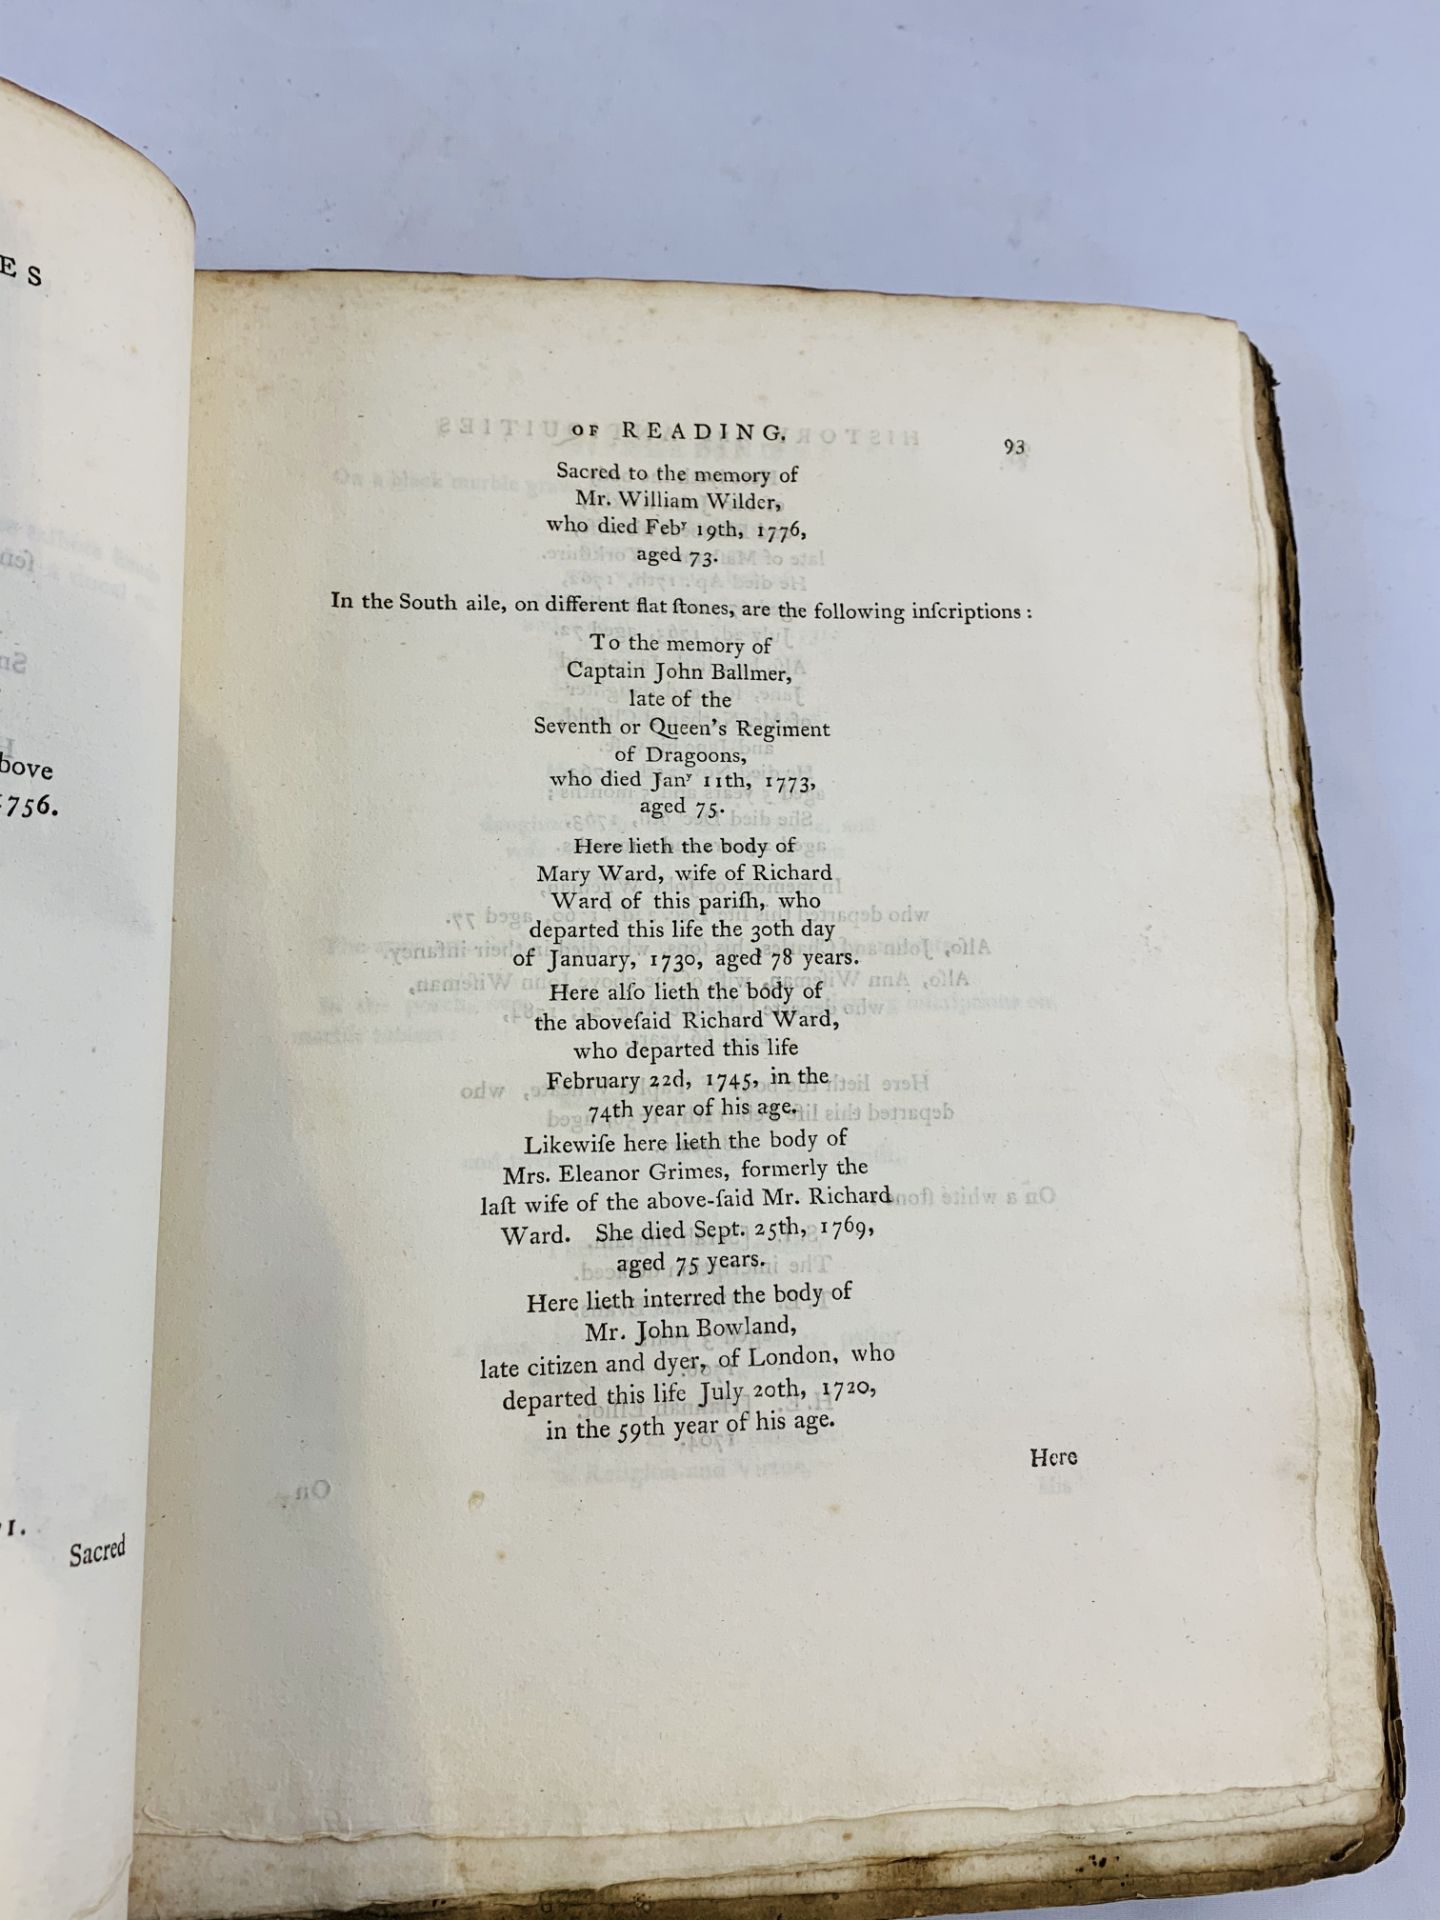 An original copy of The History and Antiquites of Reading, by Rev. Coates, published 1802 - Image 5 of 5